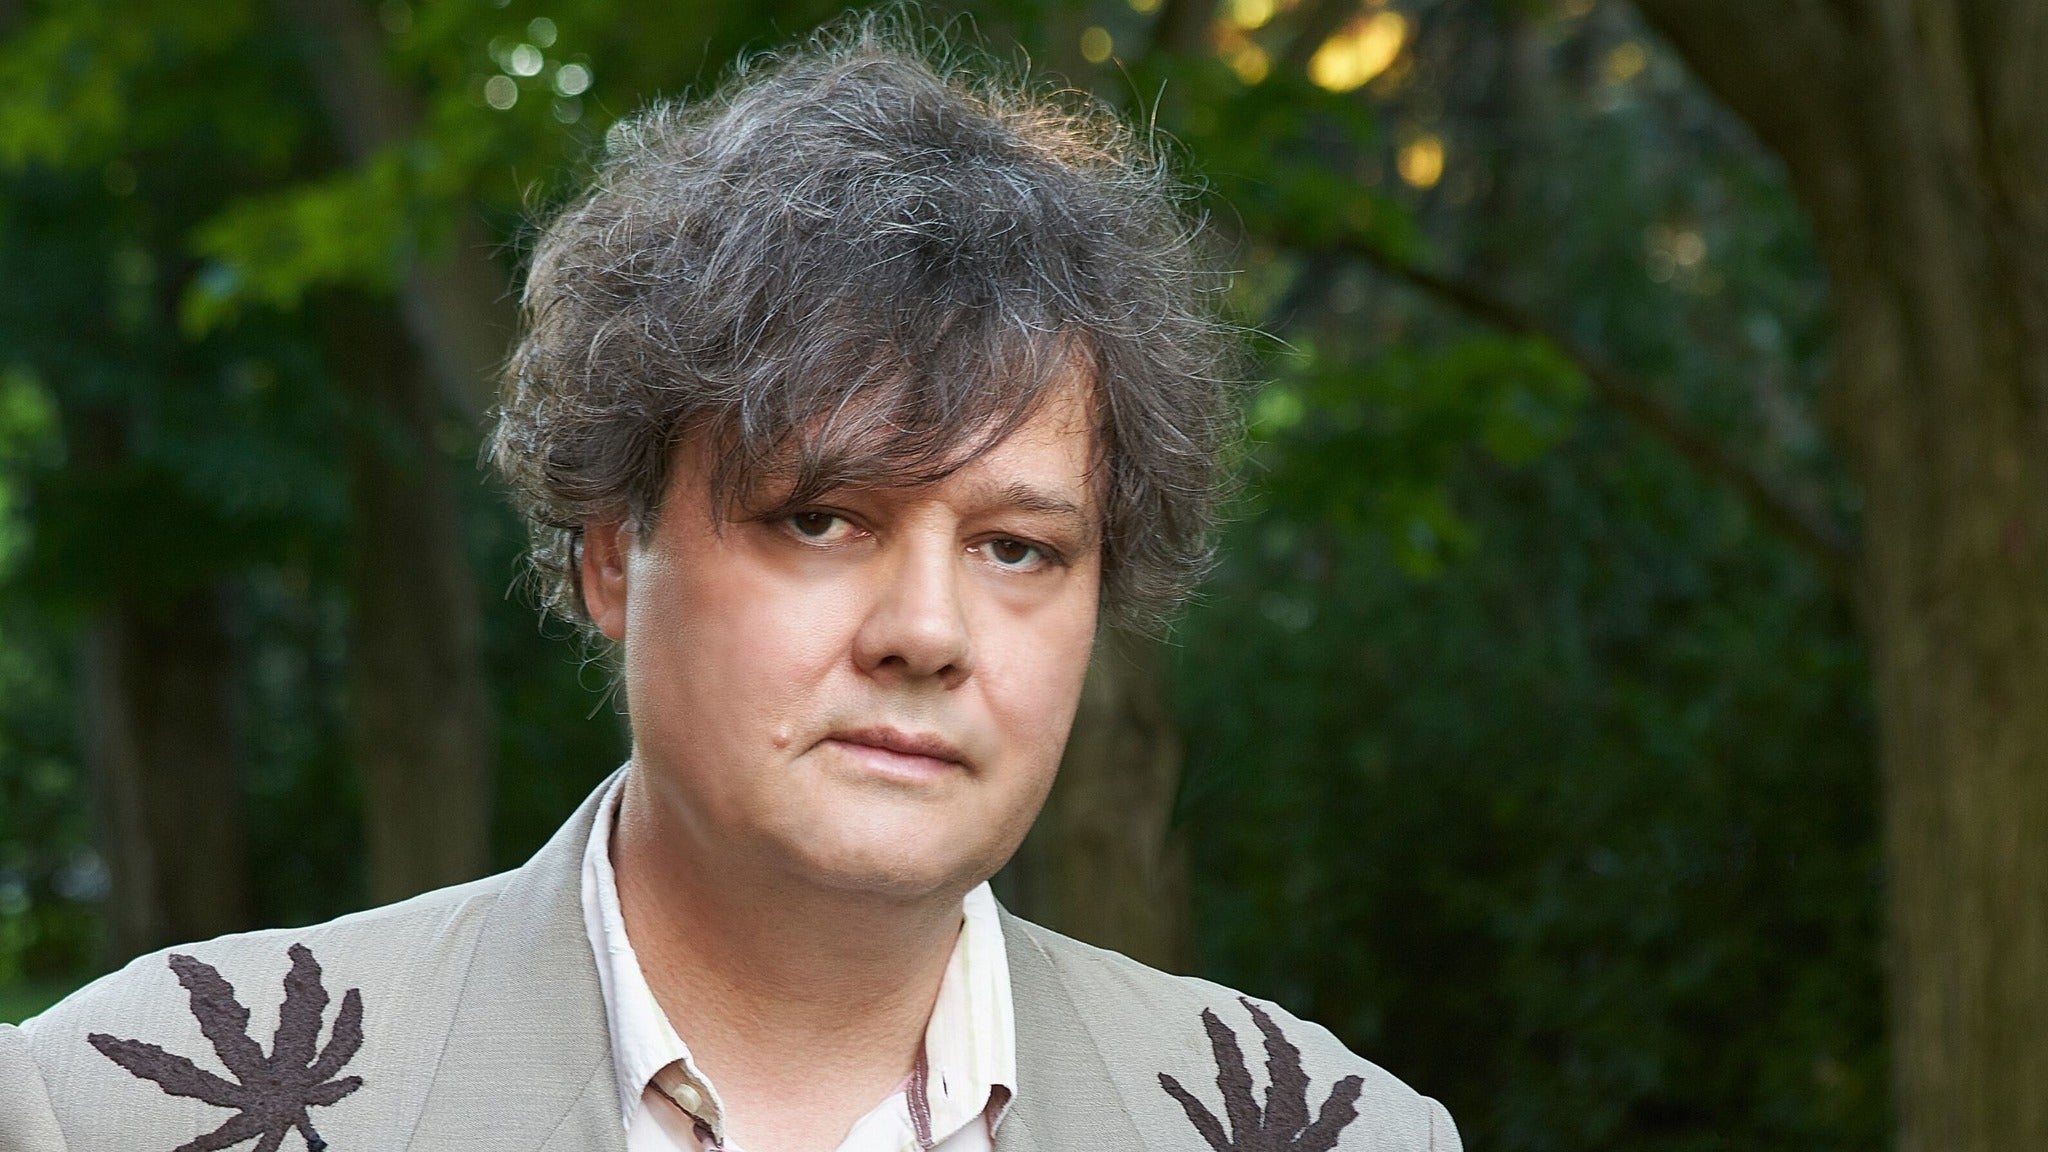 Image used with permission from Ticketmaster | Ron Sexsmith tickets